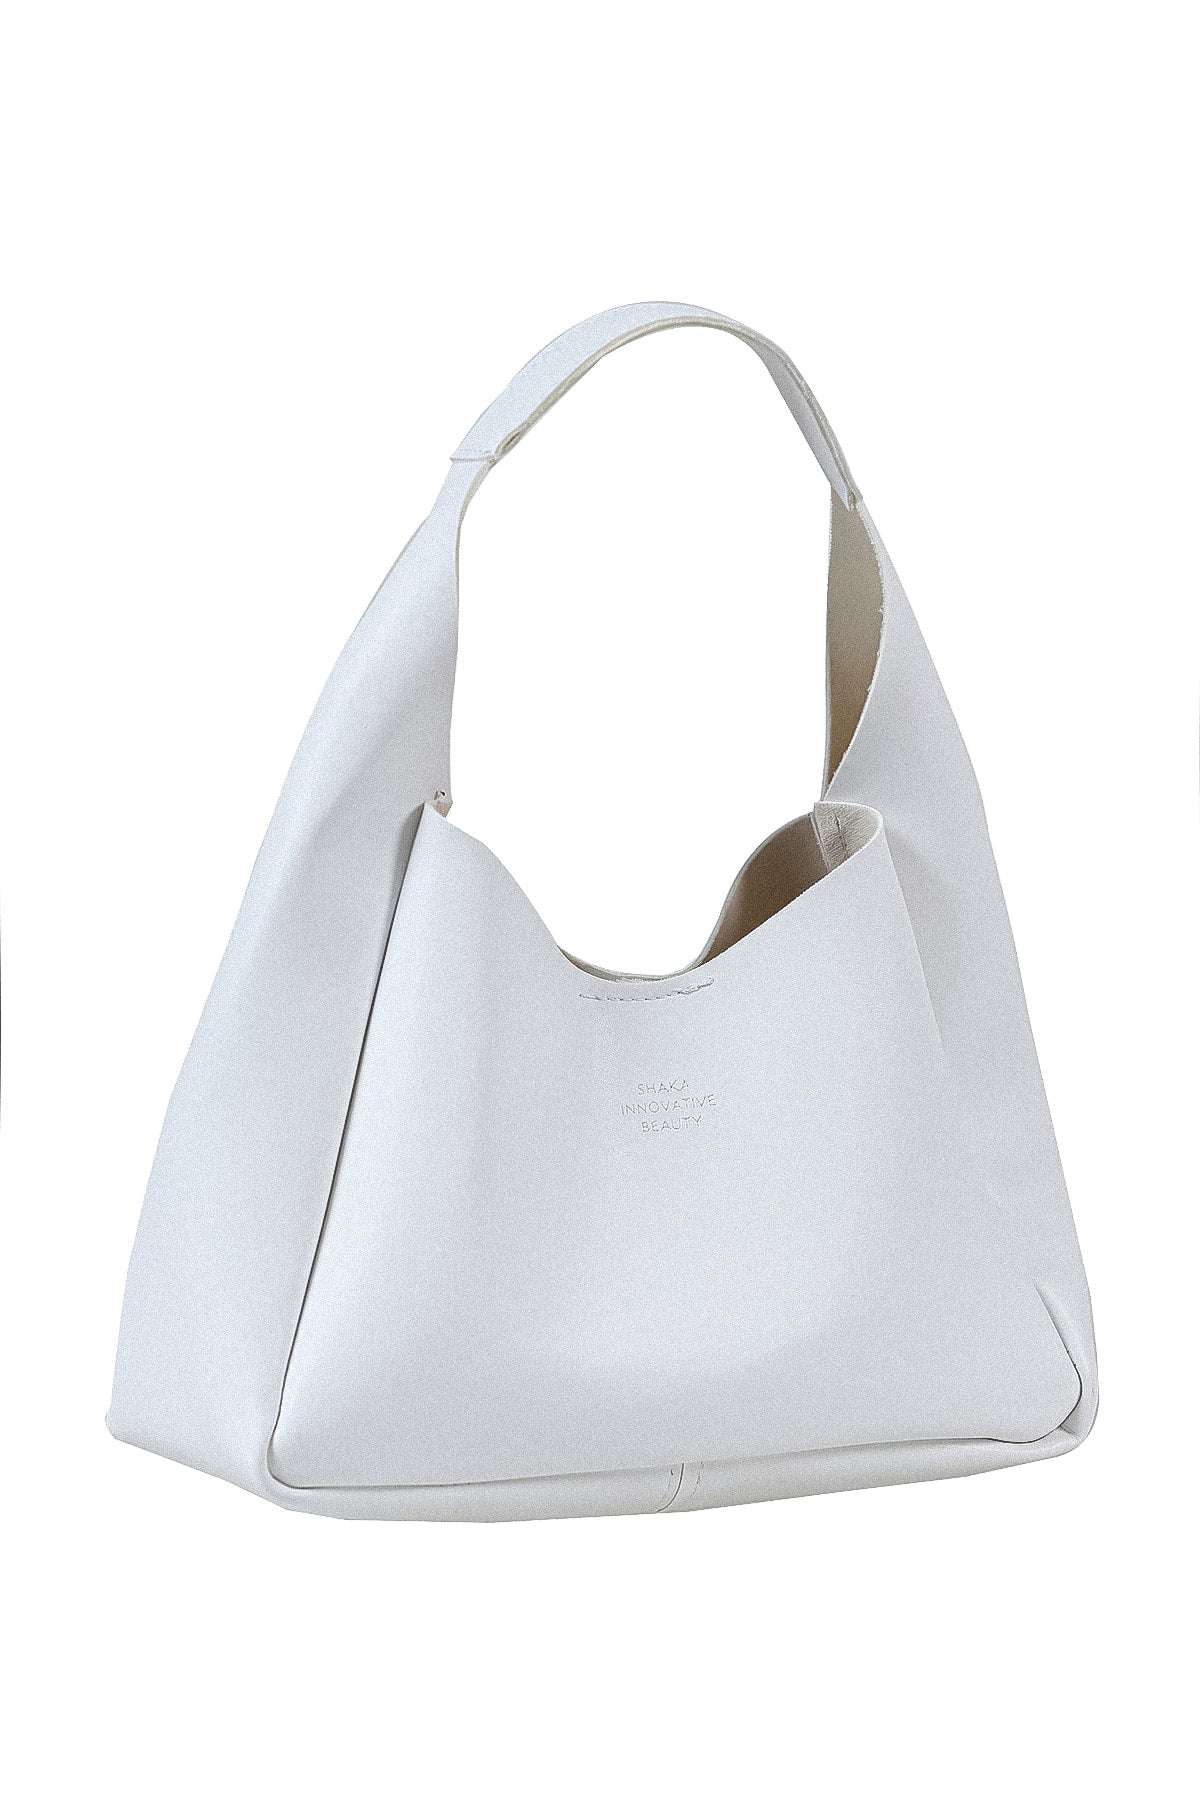 White Shk19 Zippered Imitation Leather Women's Hand And Shoulder Bag With Wallet E:33 L:15 W:10 Cm